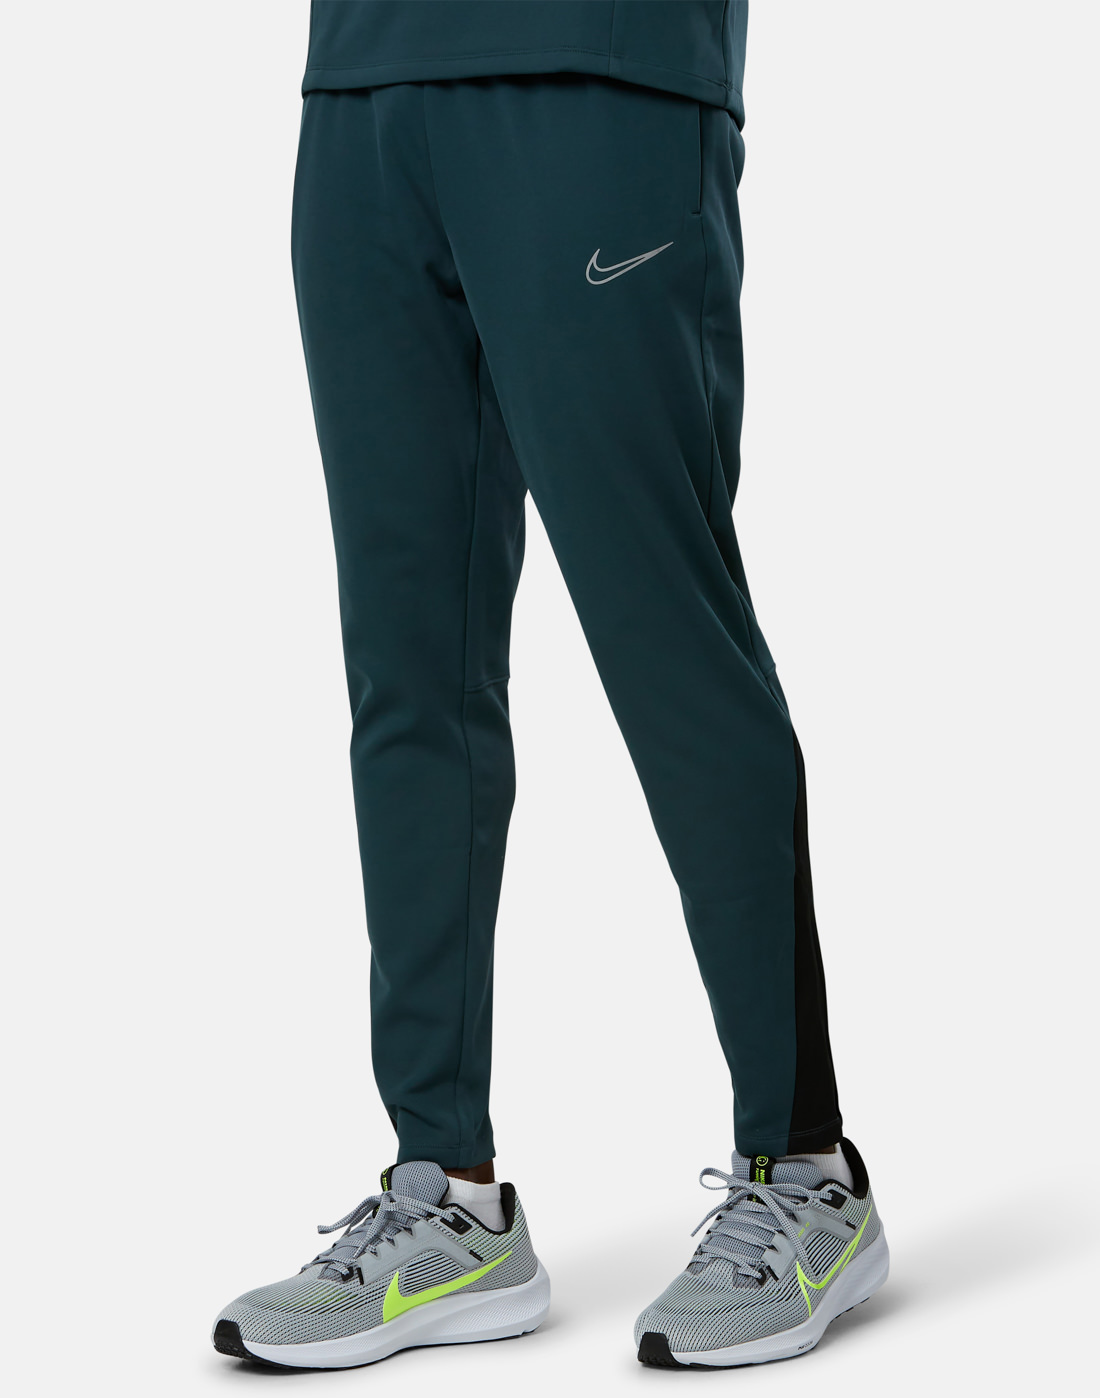 Nike Mens Winter Warrior Academy Pant - Green | Life Style Sports IE